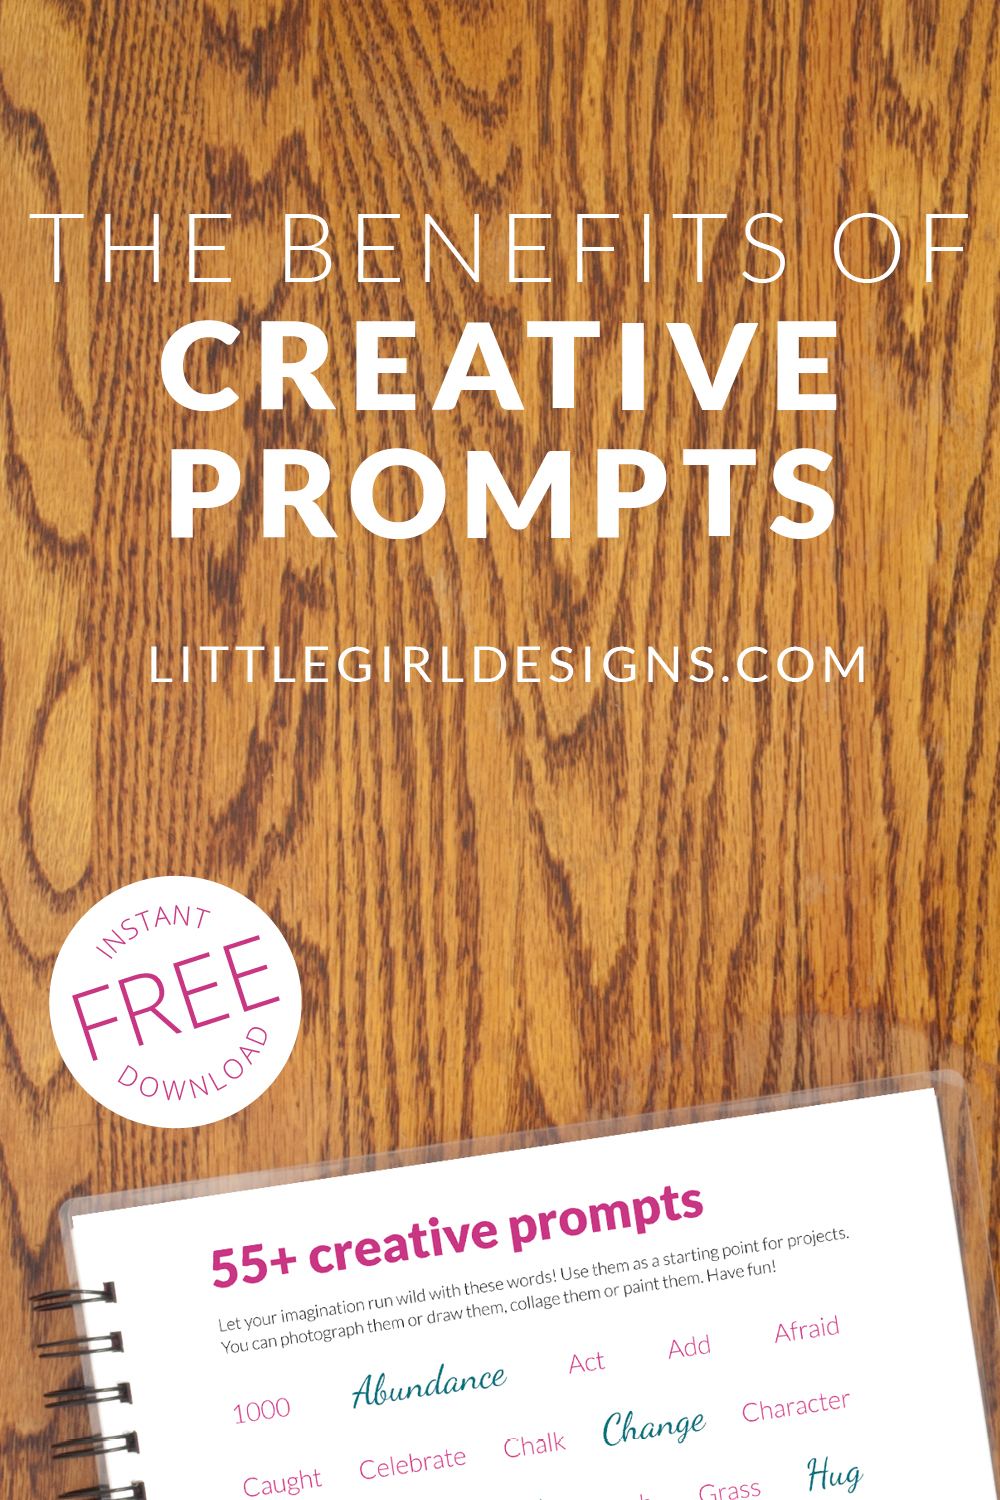 The Benefits of Creative Prompts